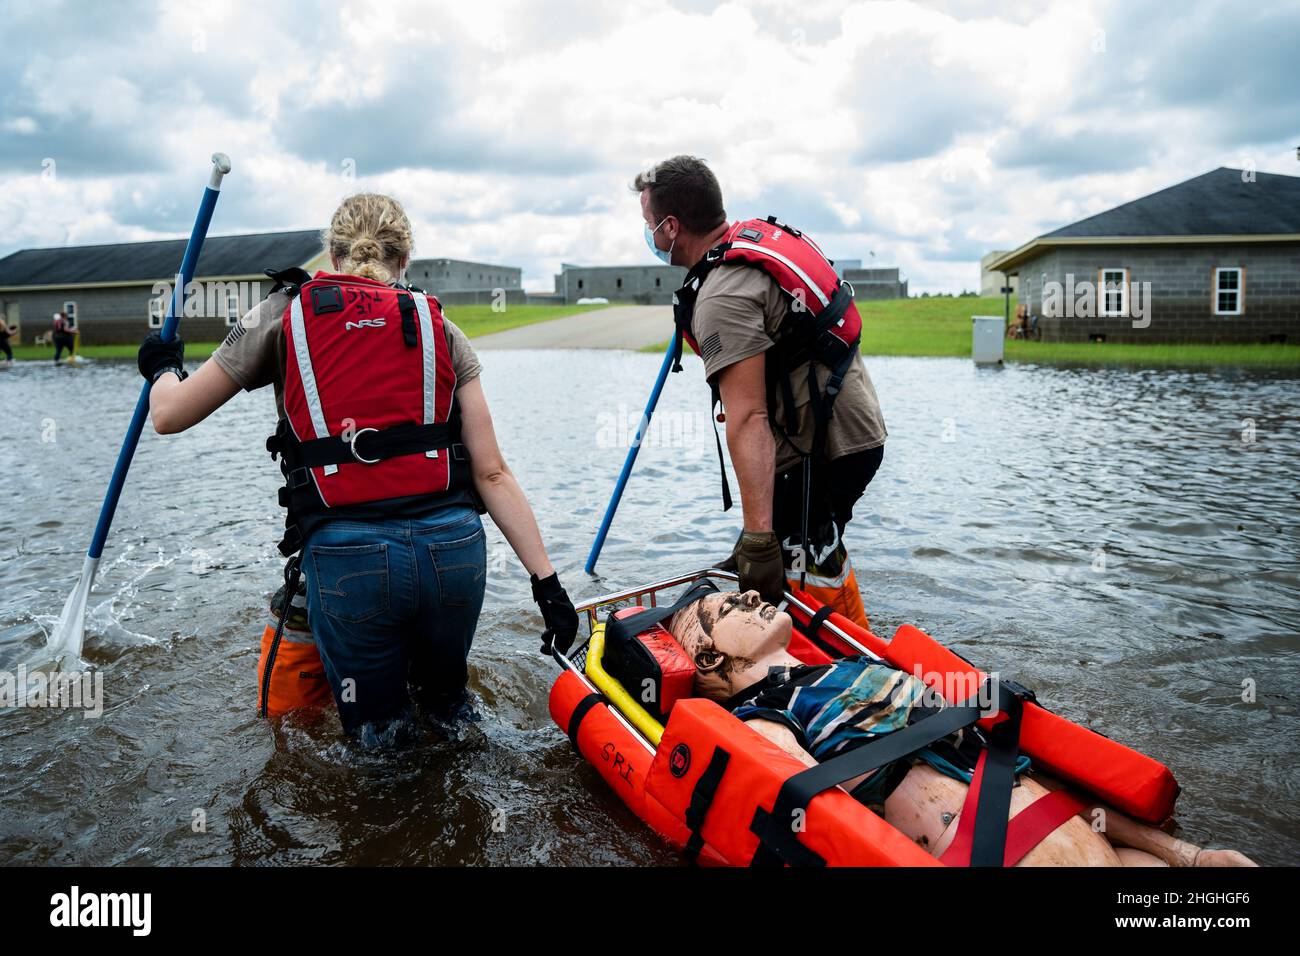 Staff Sgt. Bailey Clark (left) and Capt. Aaron Cohlima (right), 139th Medical Group, carry a backboard through the water during urban search and rescue training at the Guardian Centers, Perry, Georgia, Aug. 3, 2021. The Airmen applied life-saving skills in various disaster simulations. Stock Photo